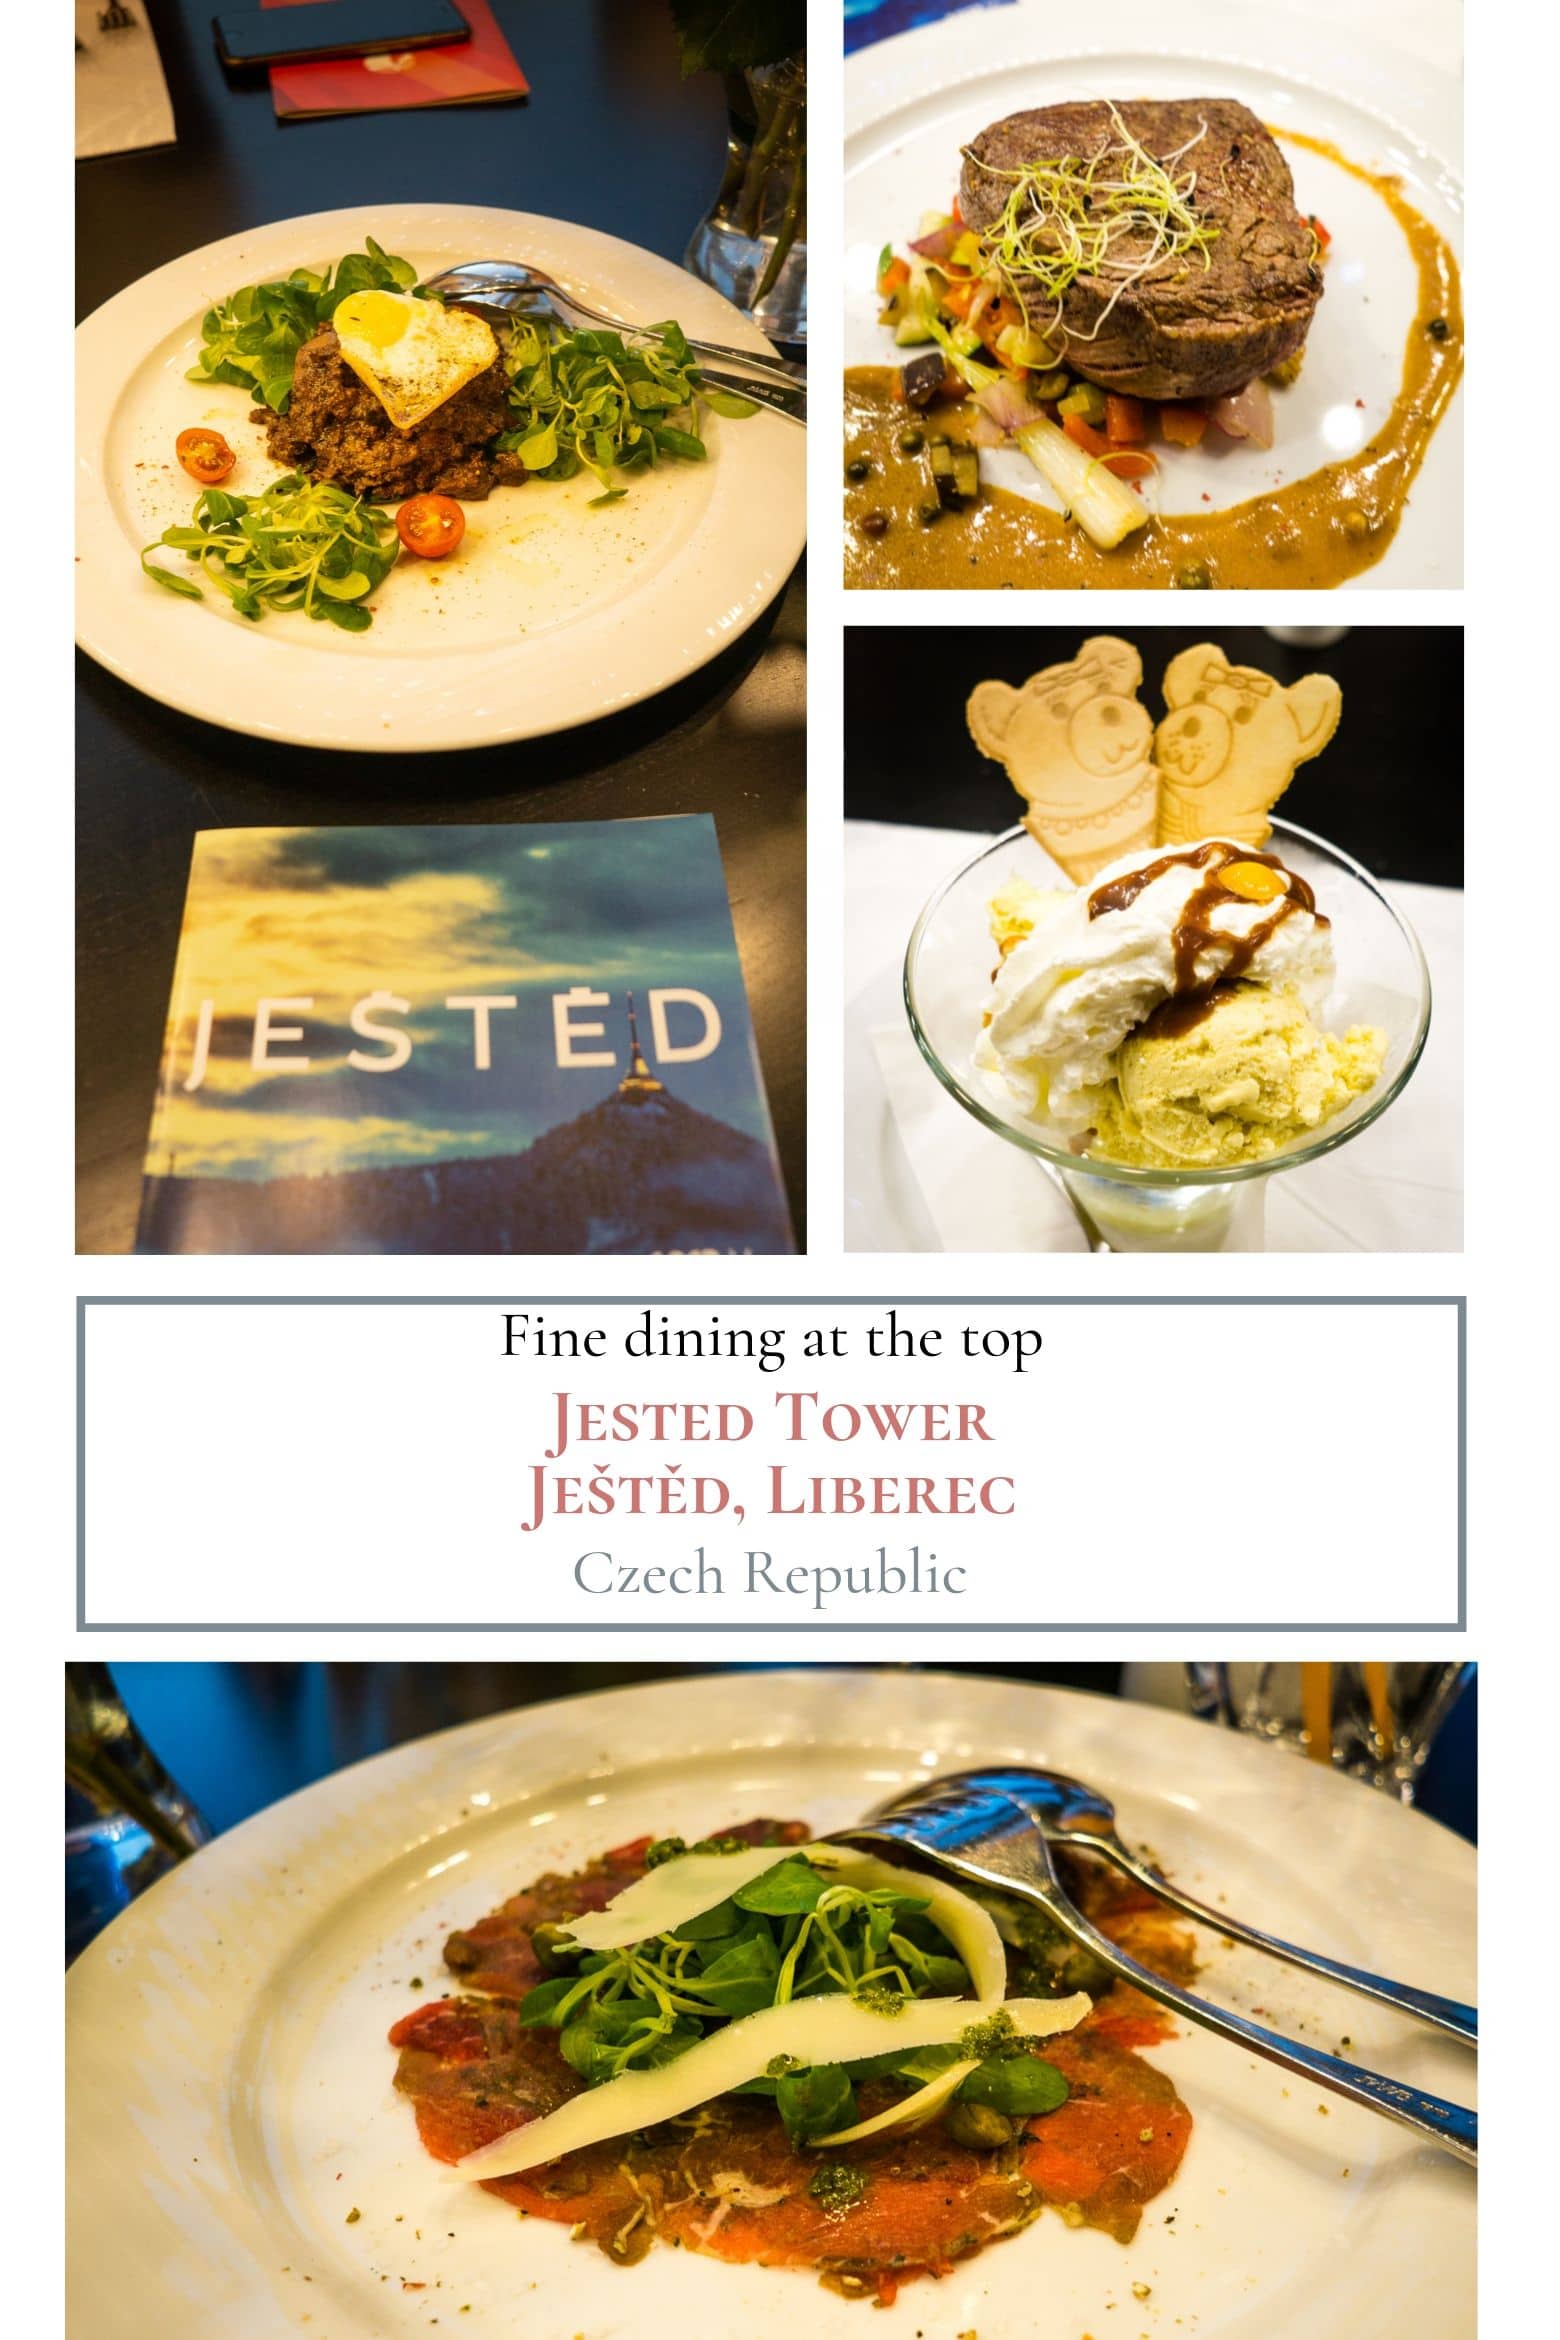 Selections from the Jested tower restaurant in a collage